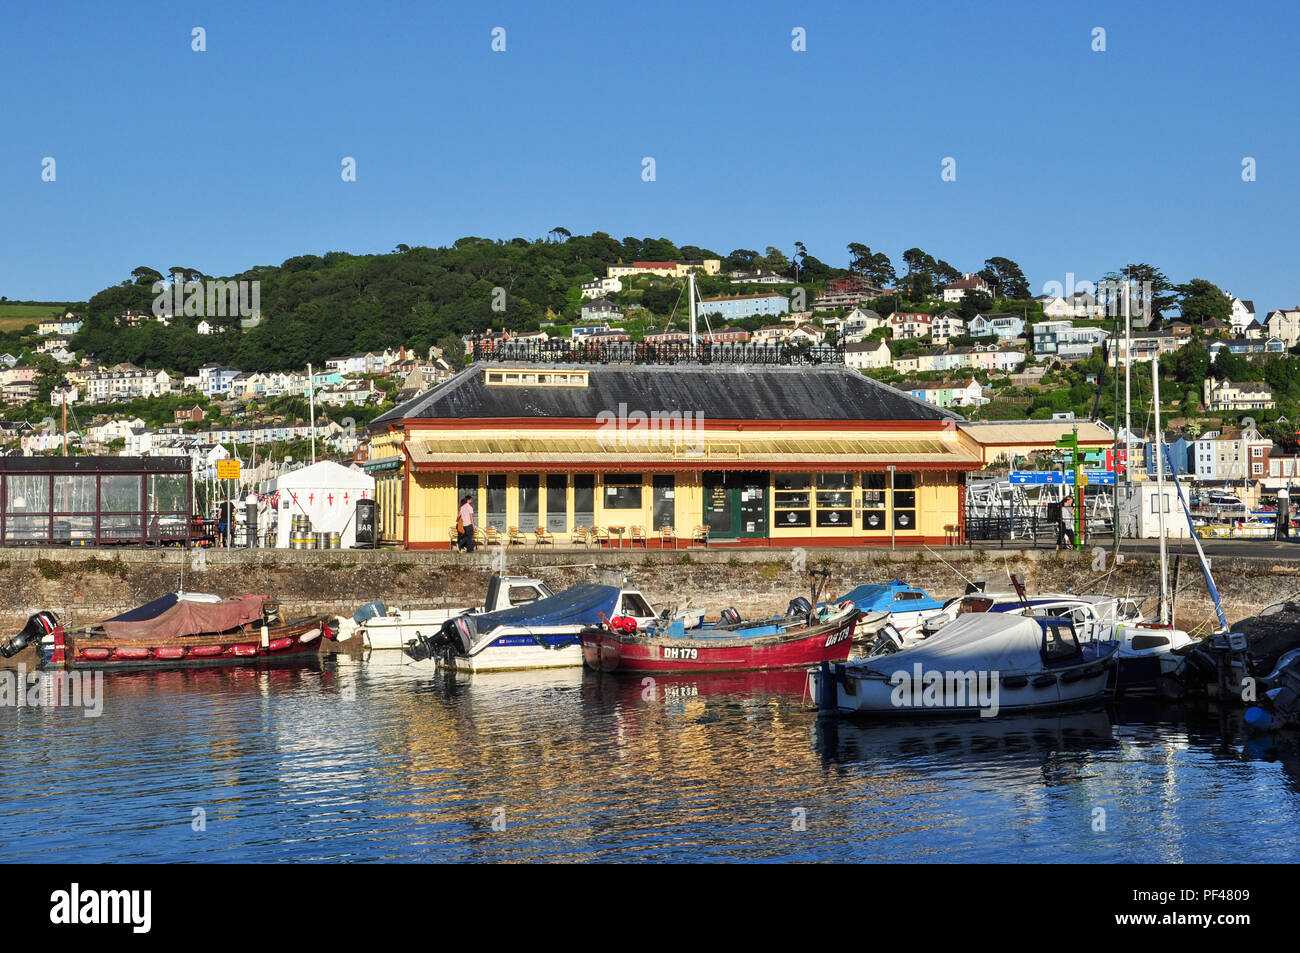 Old station building restaurant near the Boatfloat, Dartmouth (with Kingswear behind), South Devon, England, UK Stock Photo